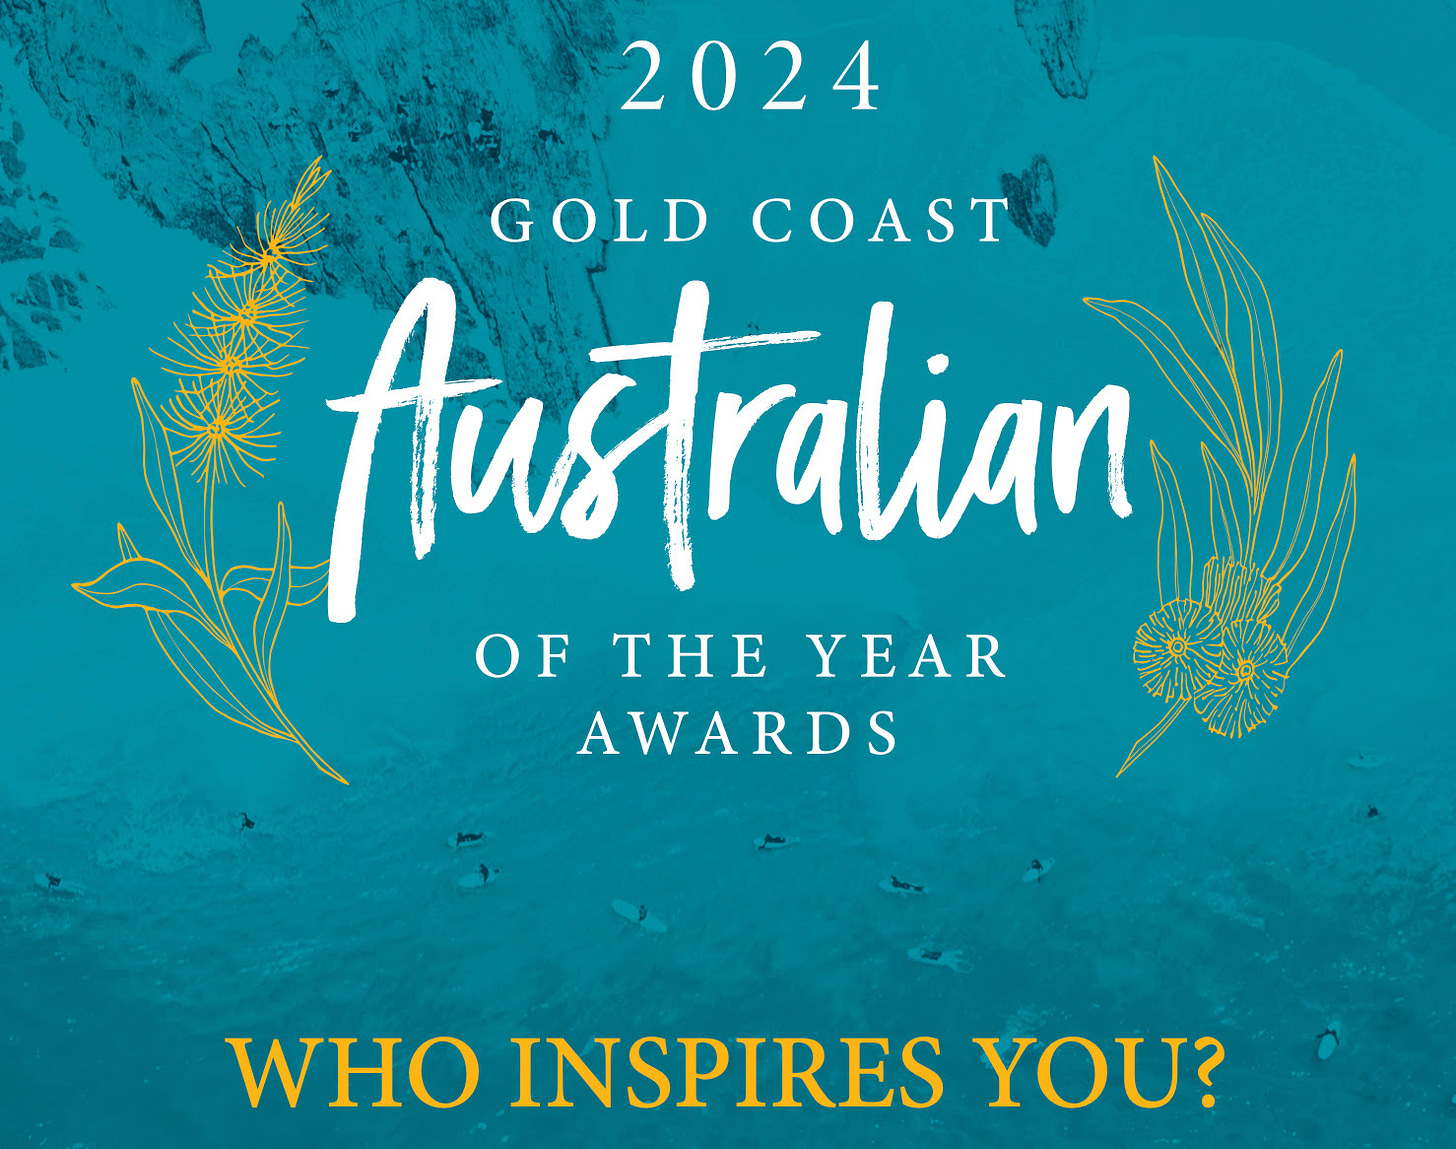 2024 Gold Coast Australian of the year awards are open now